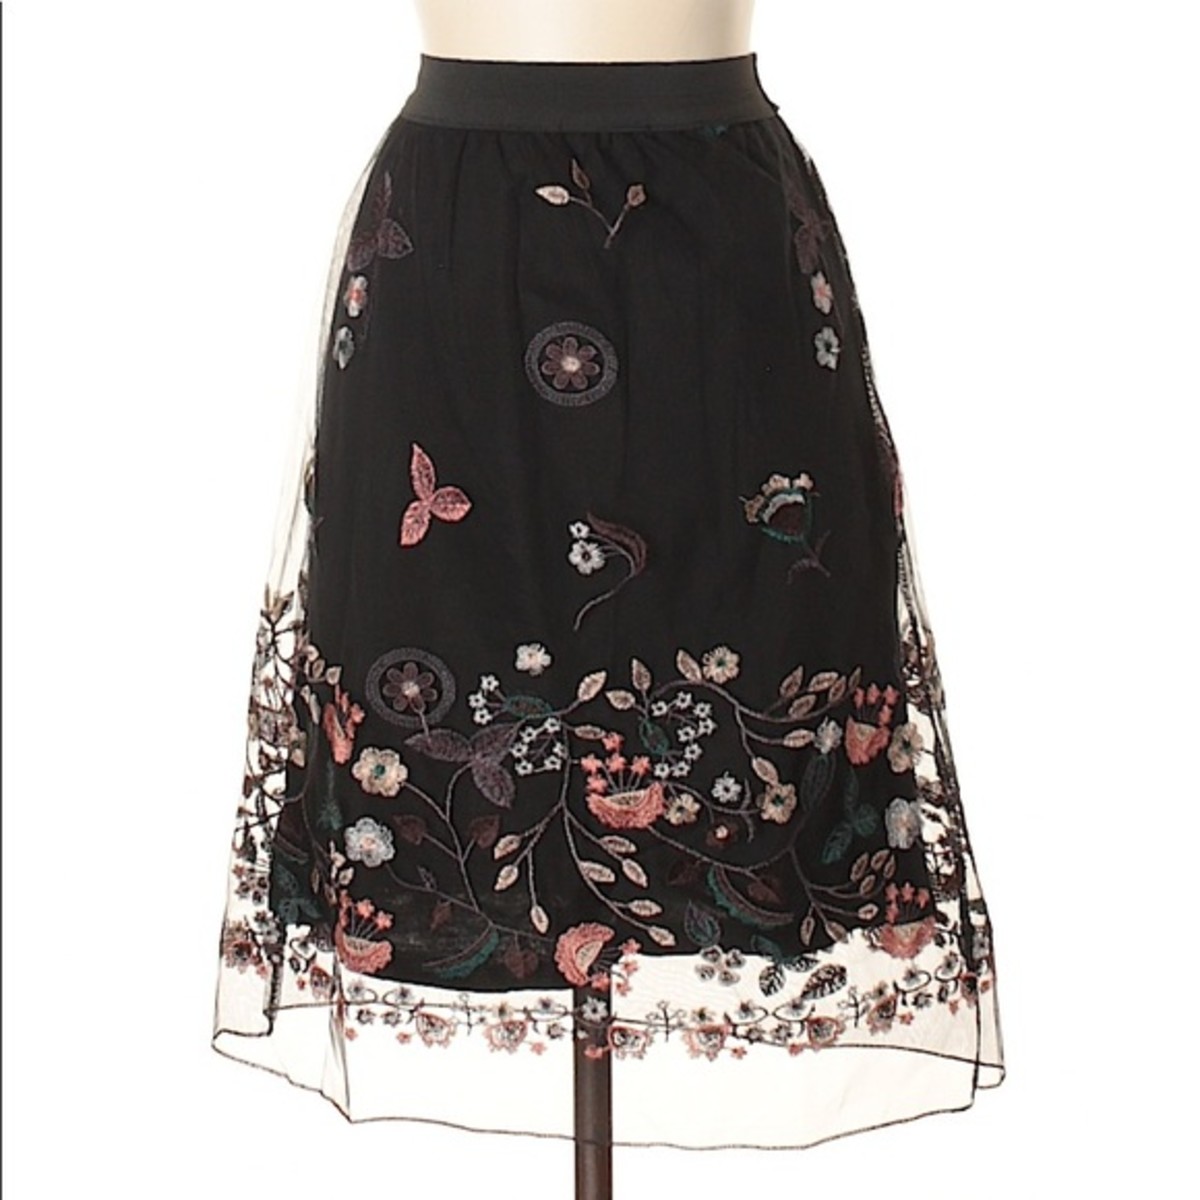 pennys-posh-picks-of-the-week-dont-skirt-this-issue-august-12